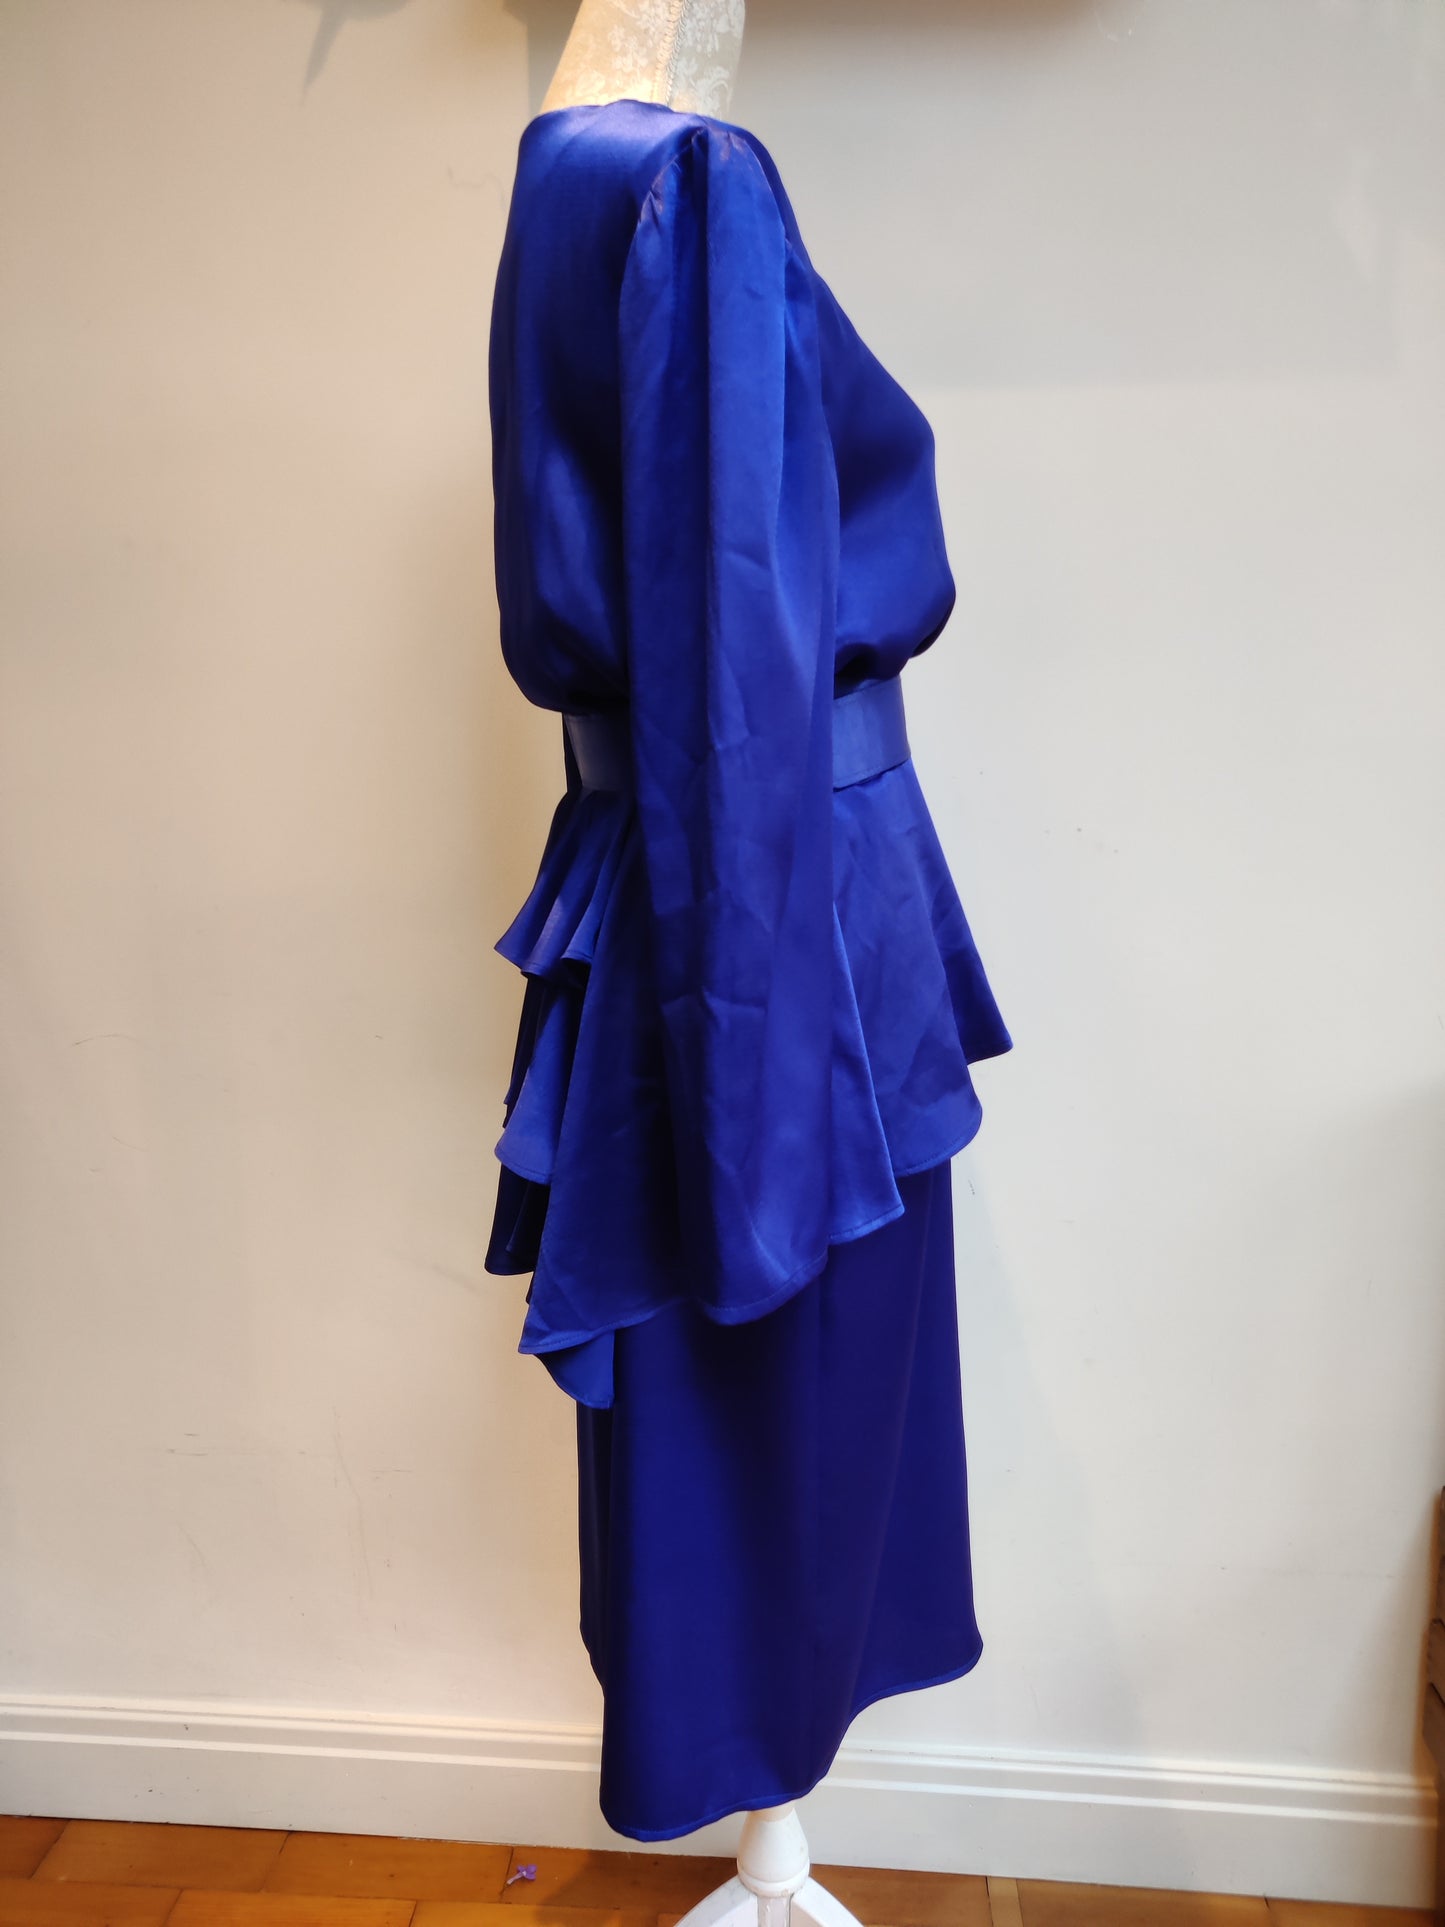 1980s electric blue evening dress with frill back. Size 12.